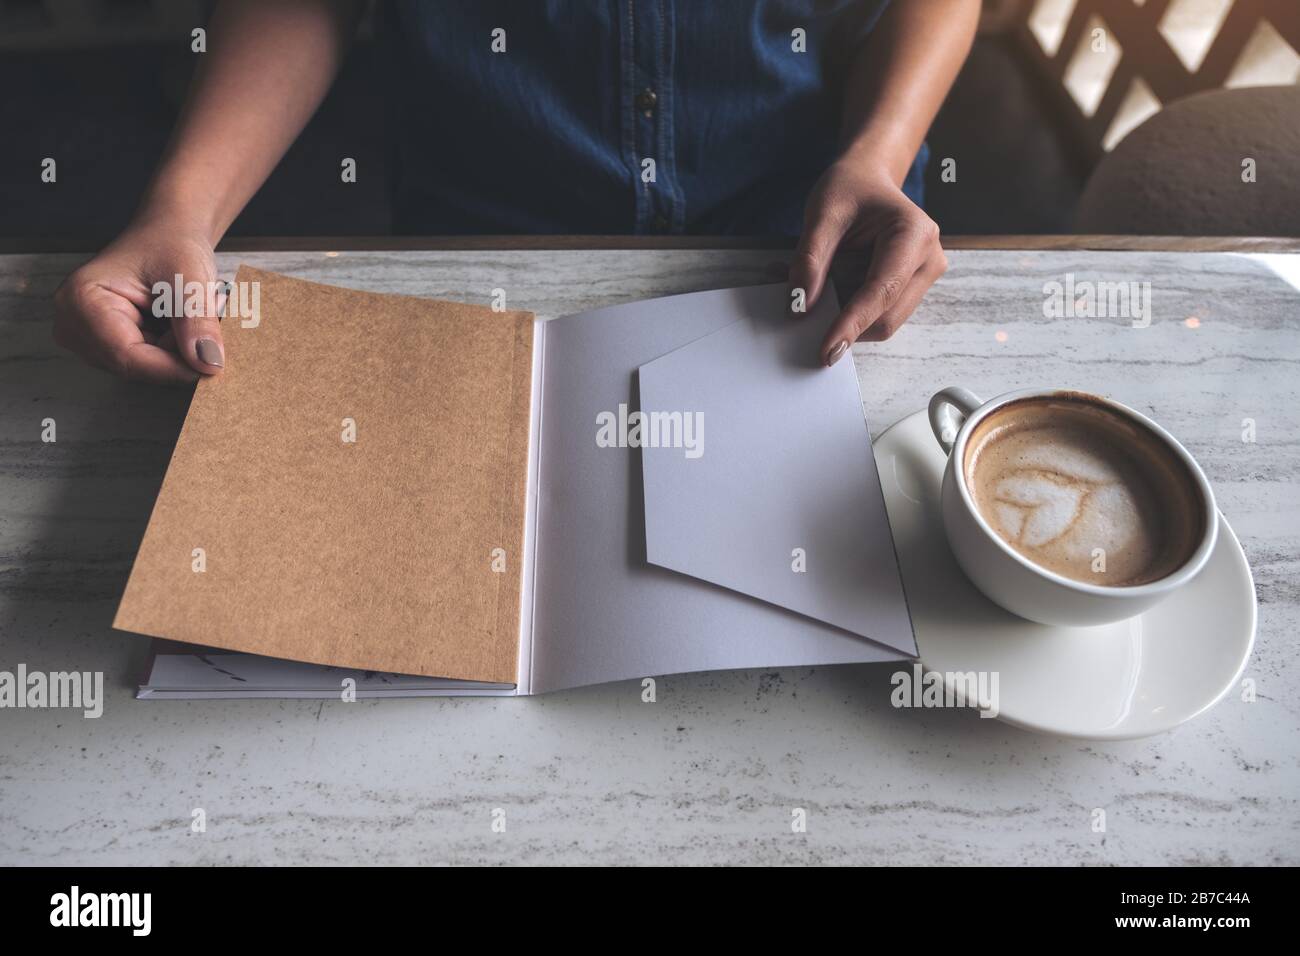 Closeup image of a woman opening a book with coffee cup on table in modern cafe Stock Photo